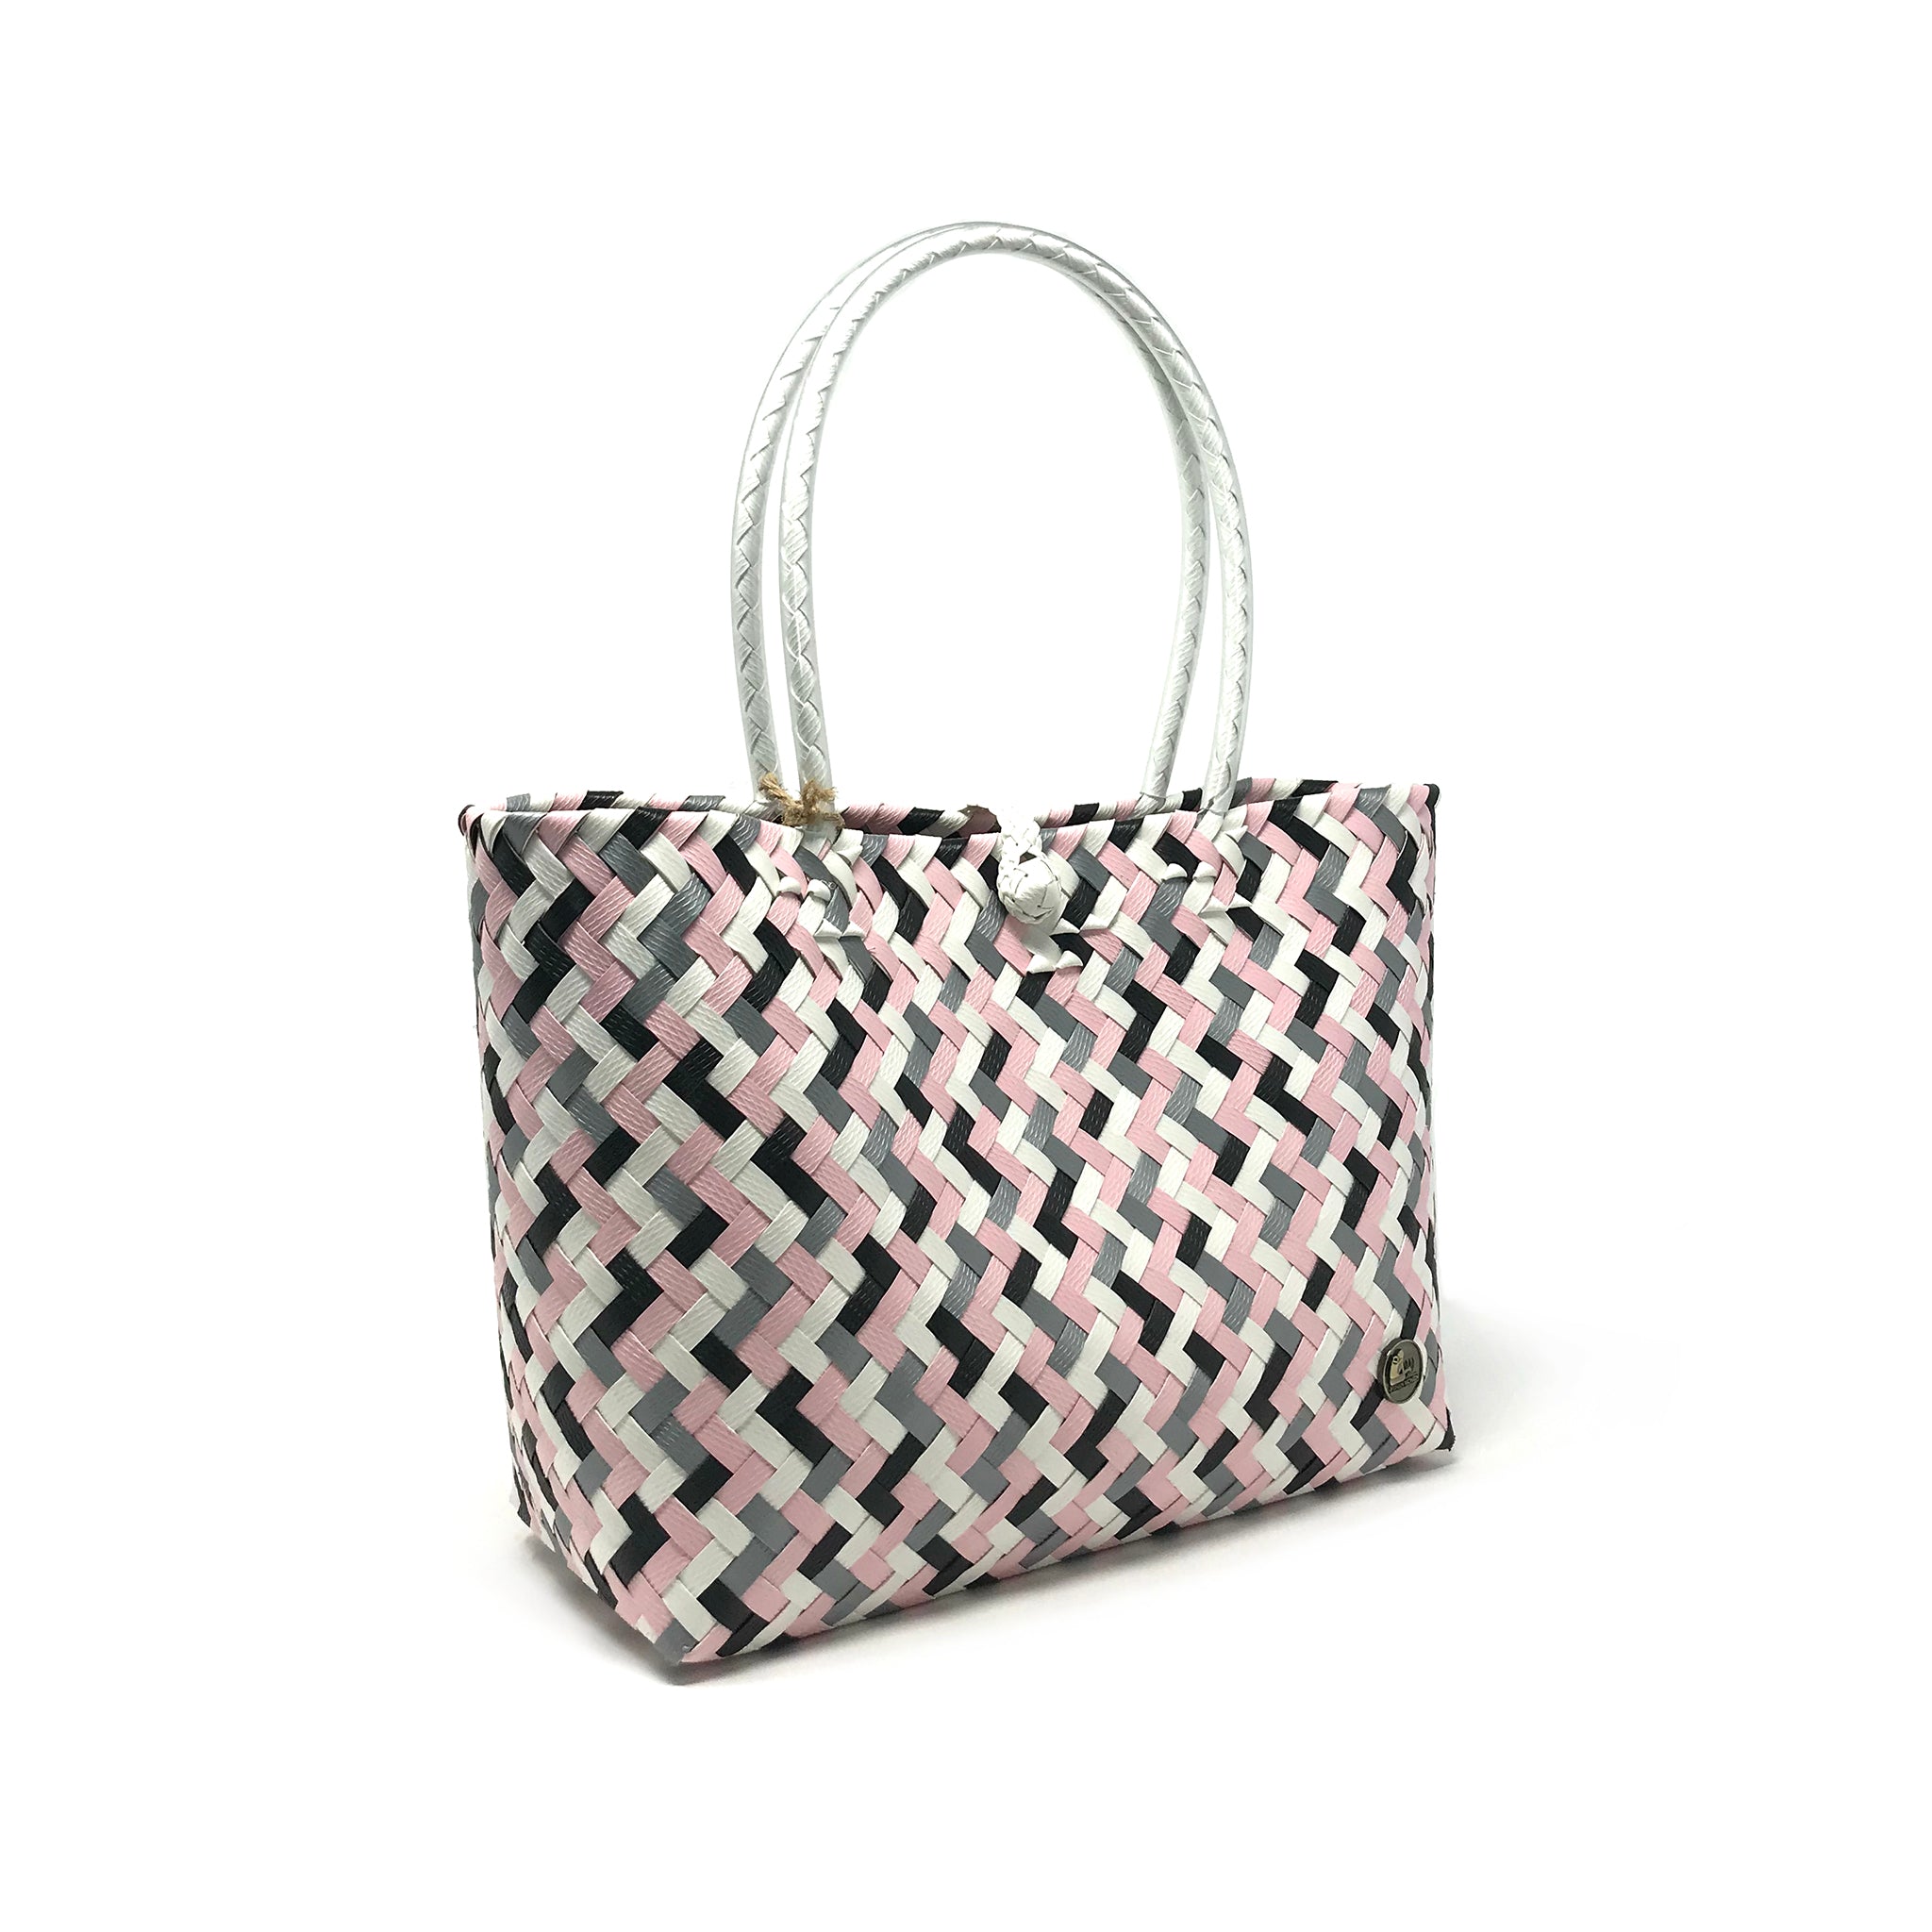 Pink, black and white small size tote bag at a 45-degree angle.